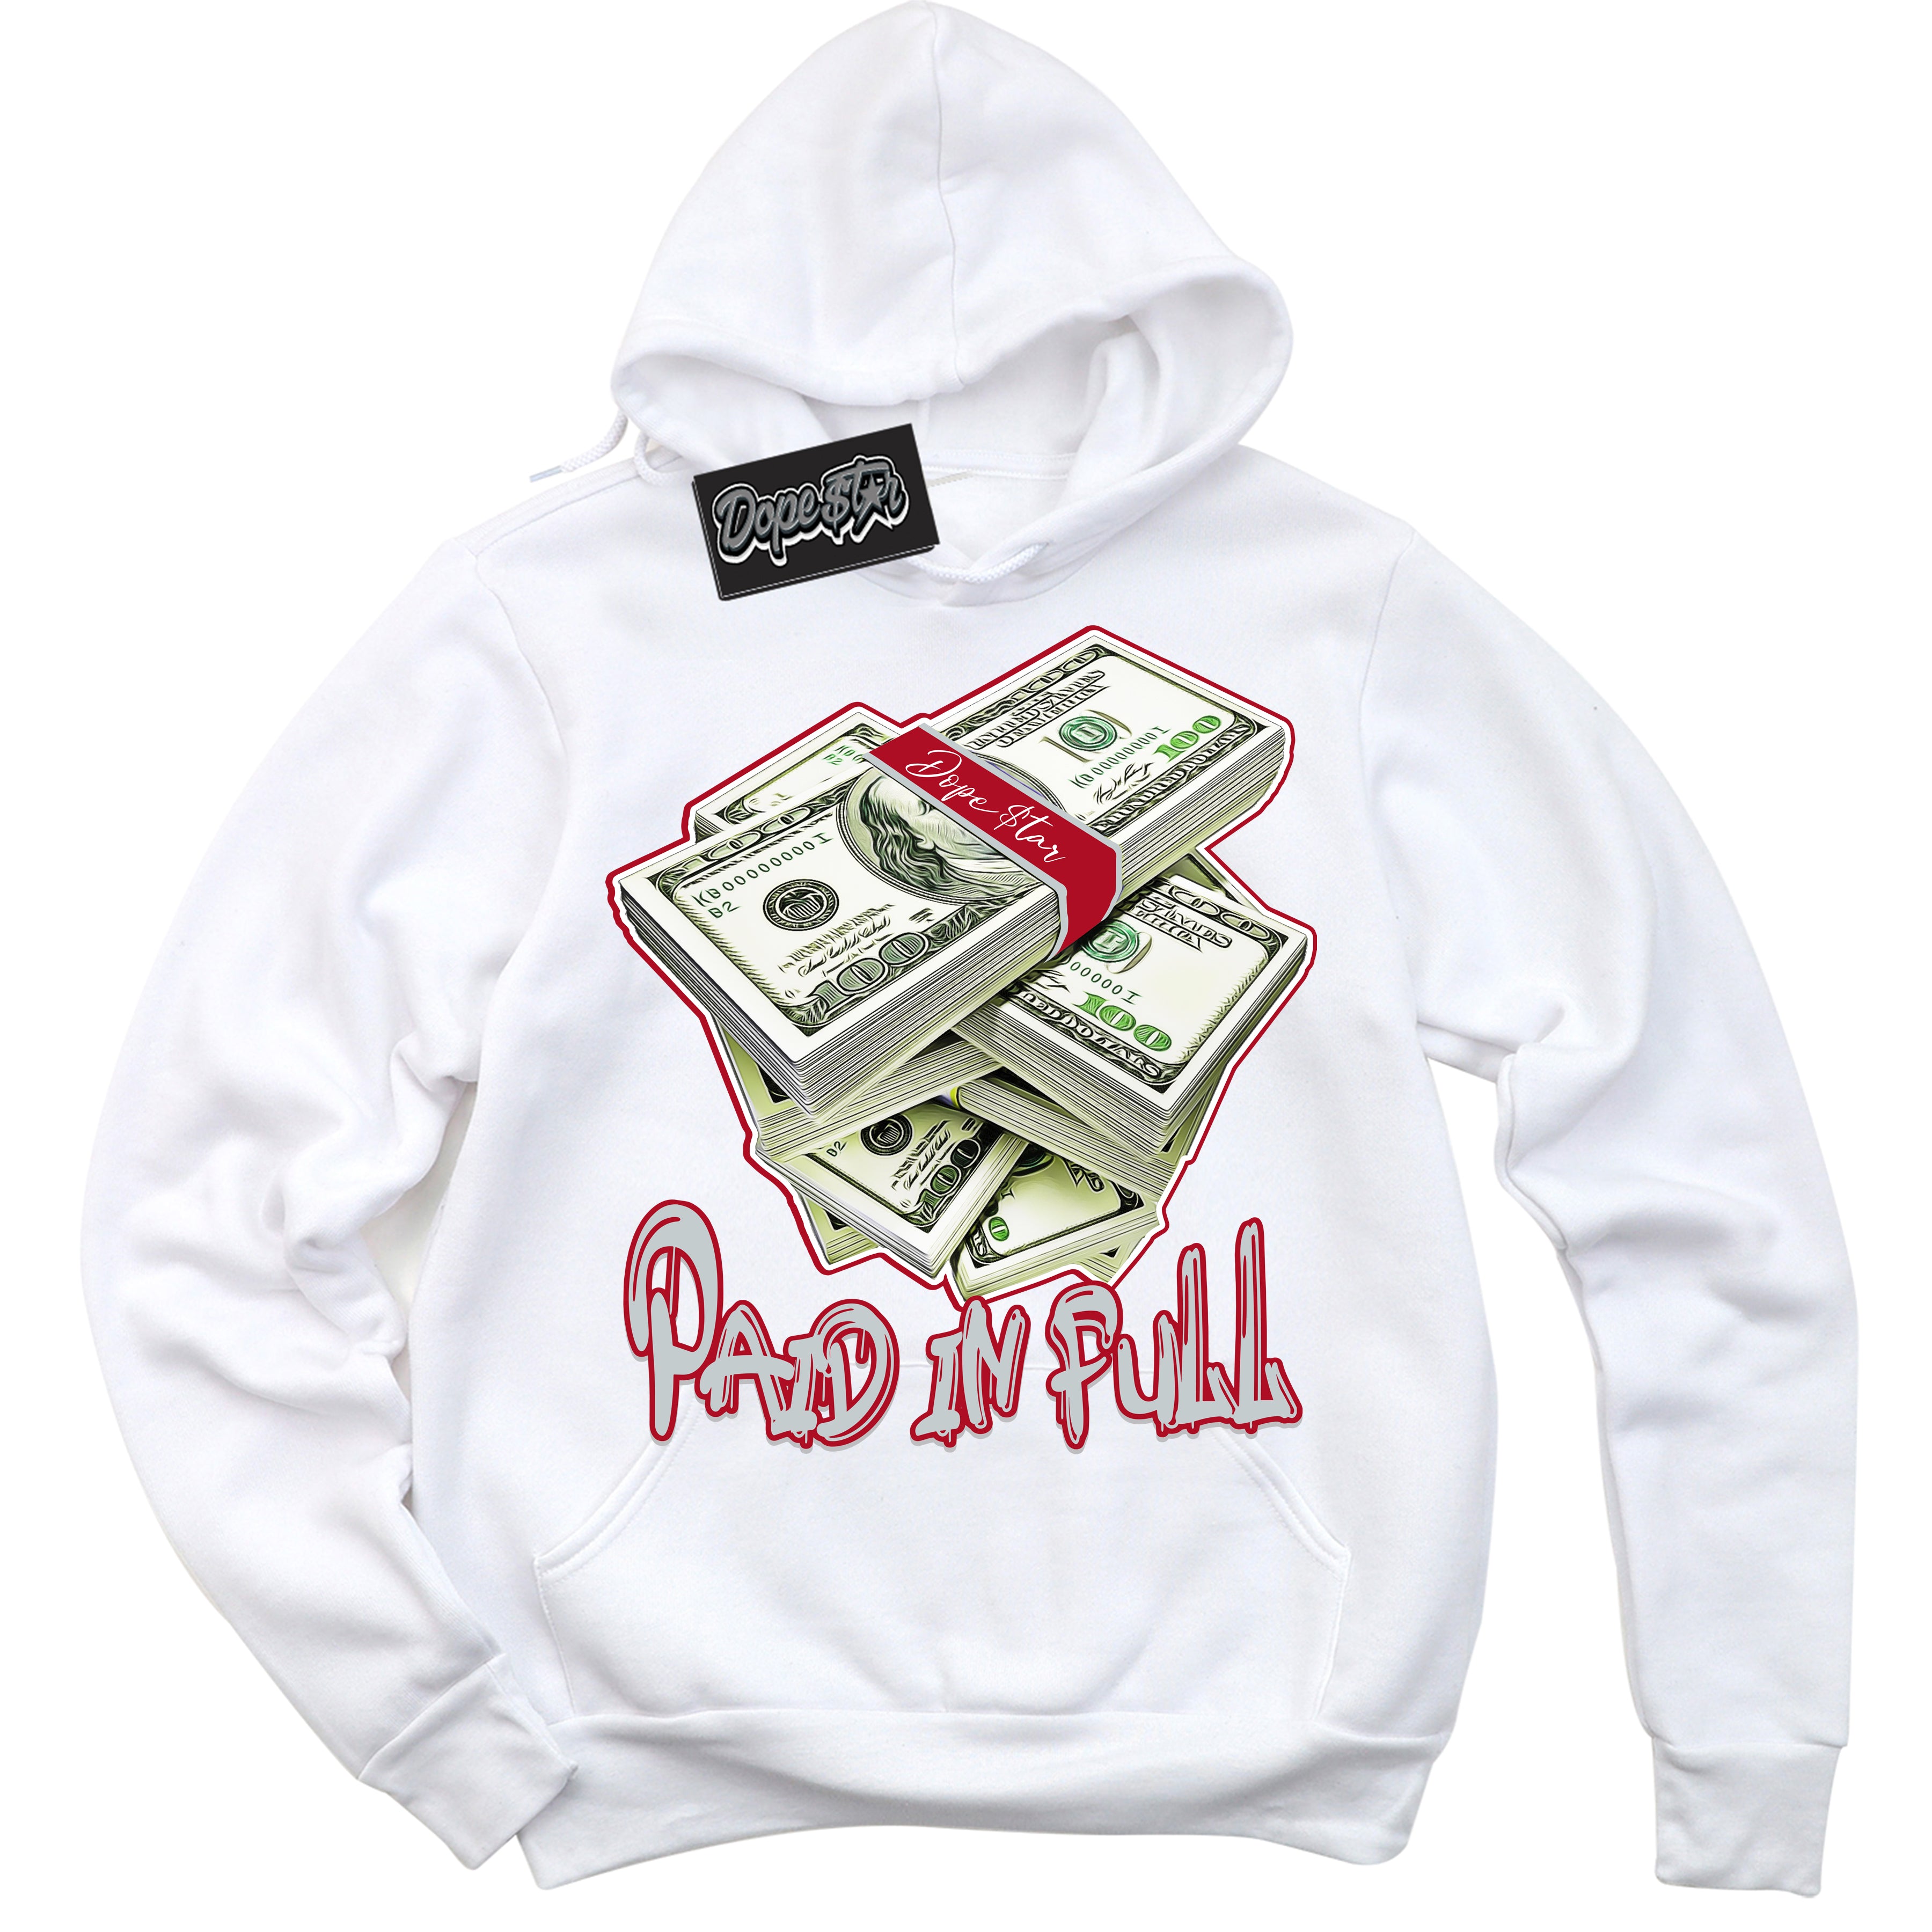 Cool White Hoodie with “ Paid In Full ”  design that Perfectly Matches Reverse Ultraman Sneakers.